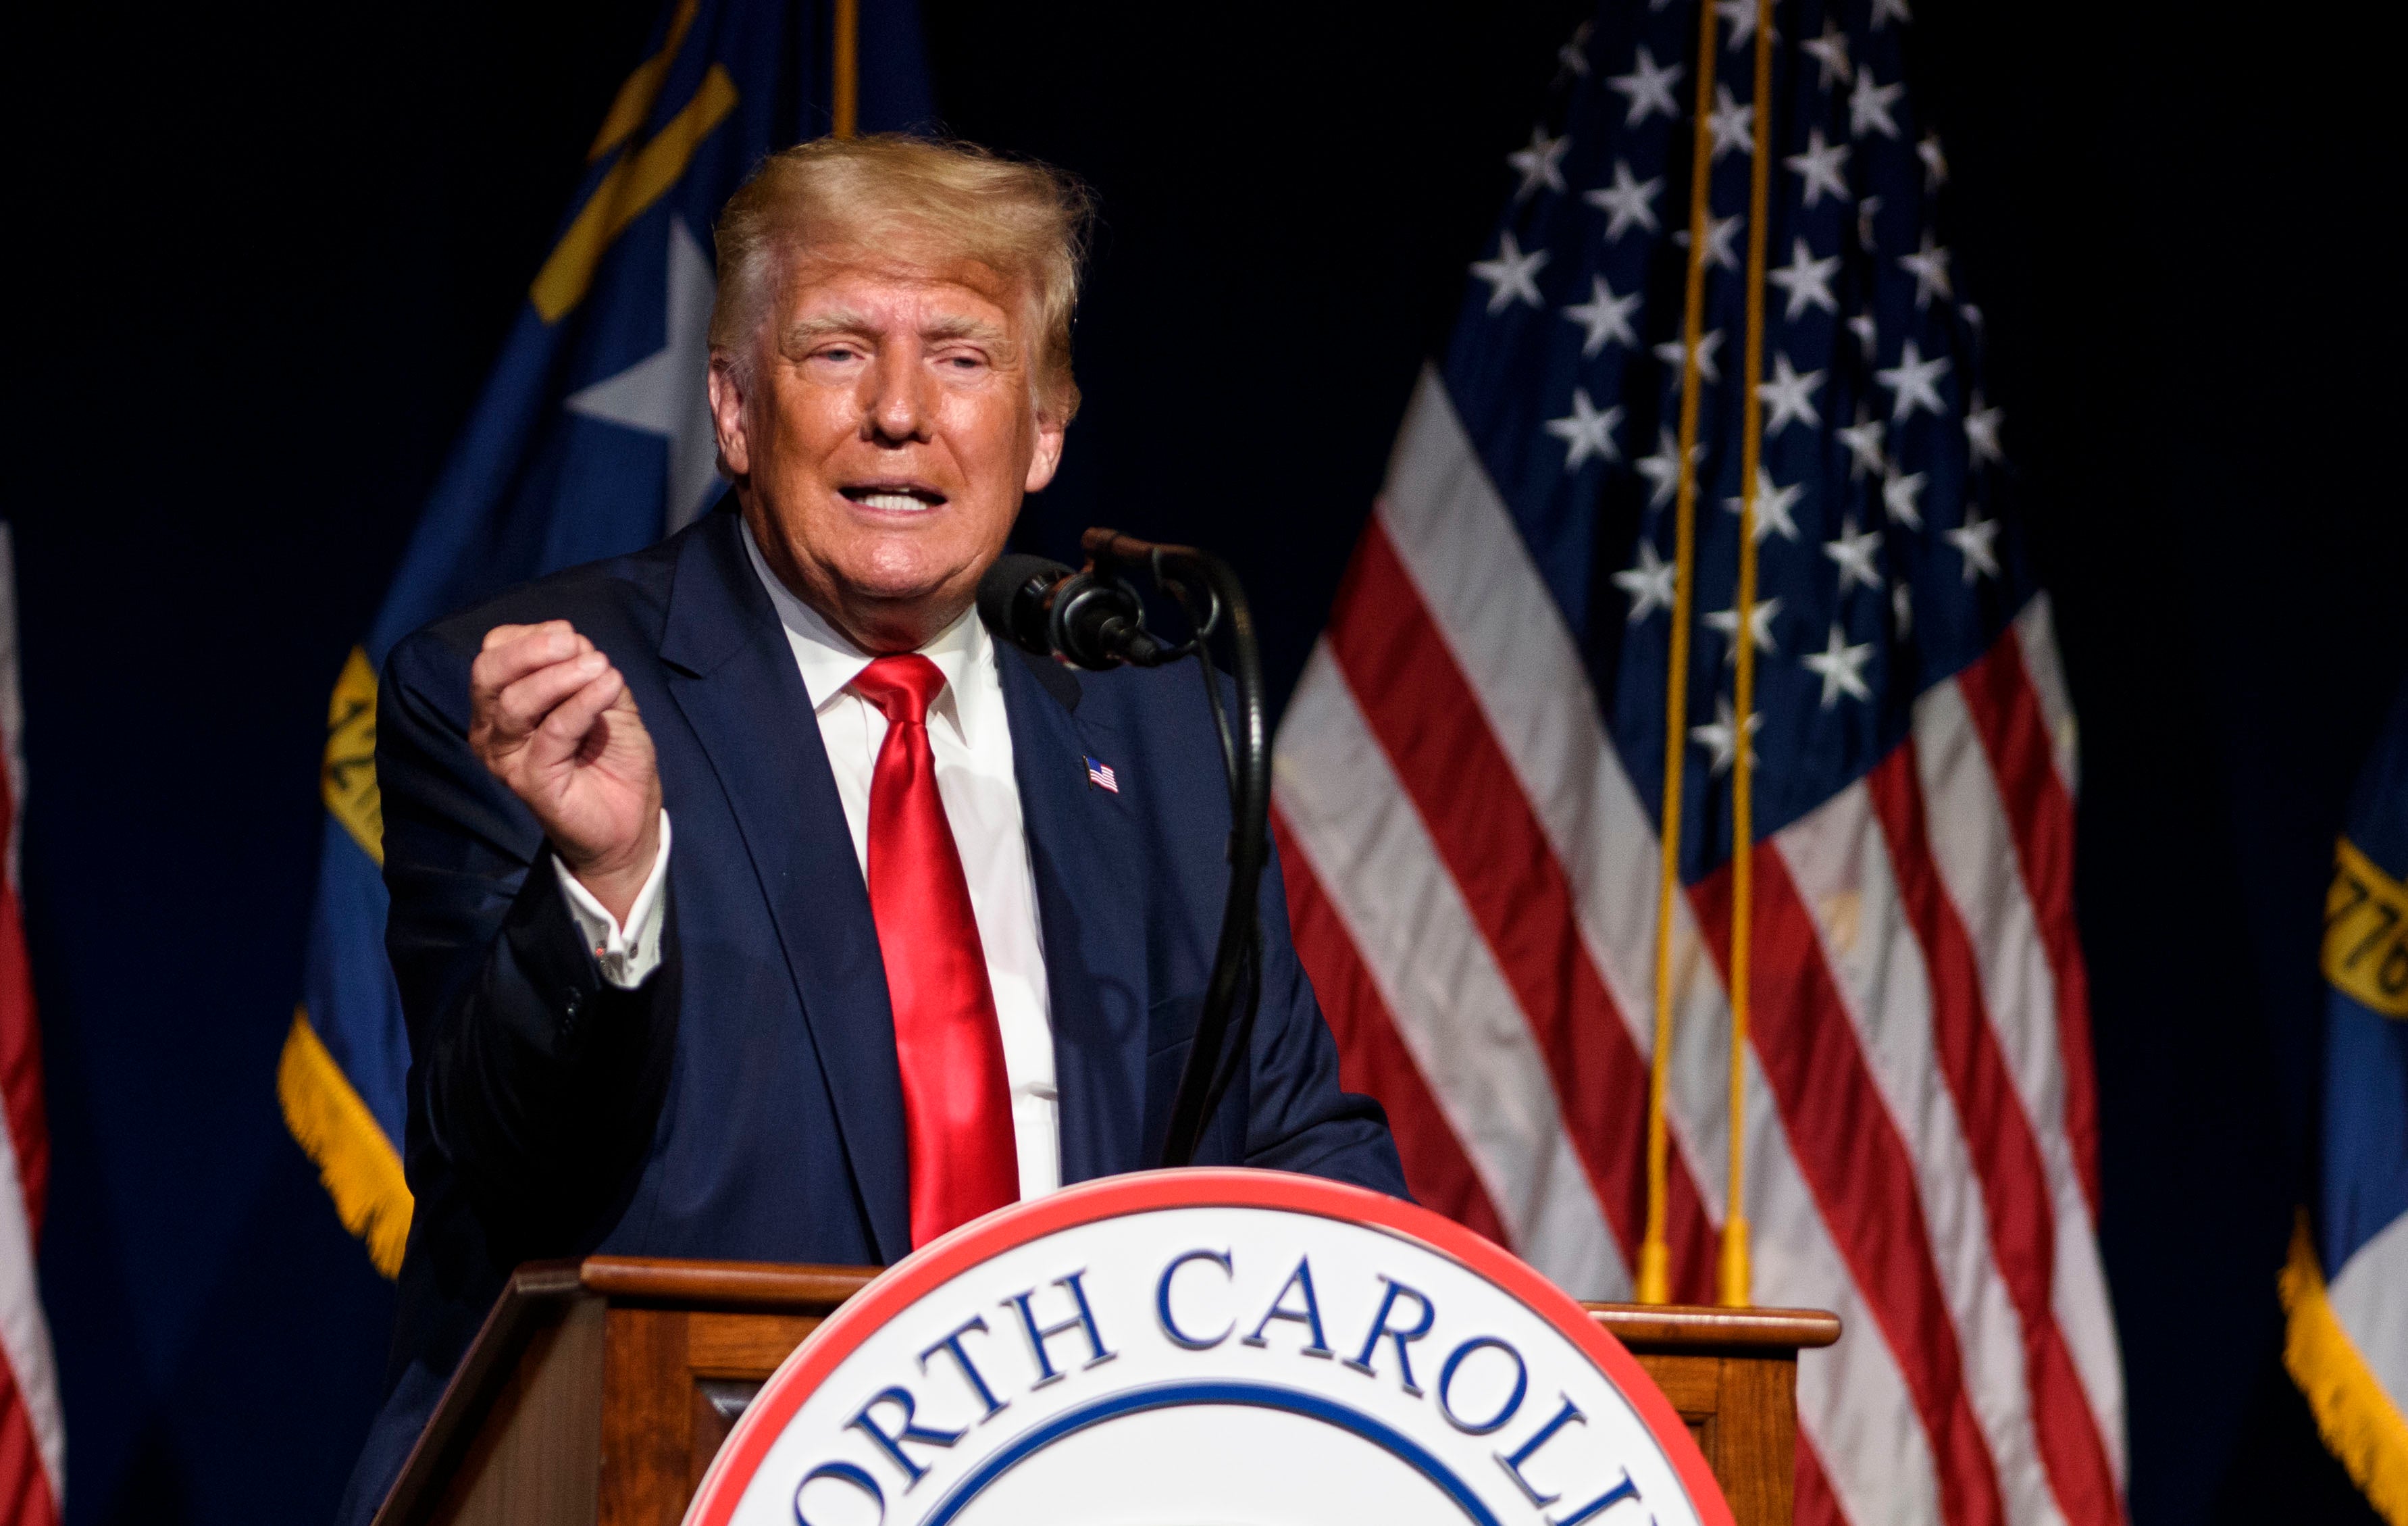 Former US President Donald Trump addresses the NCGOP state convention on June 5, 2021 in Greenville, North Carolina.